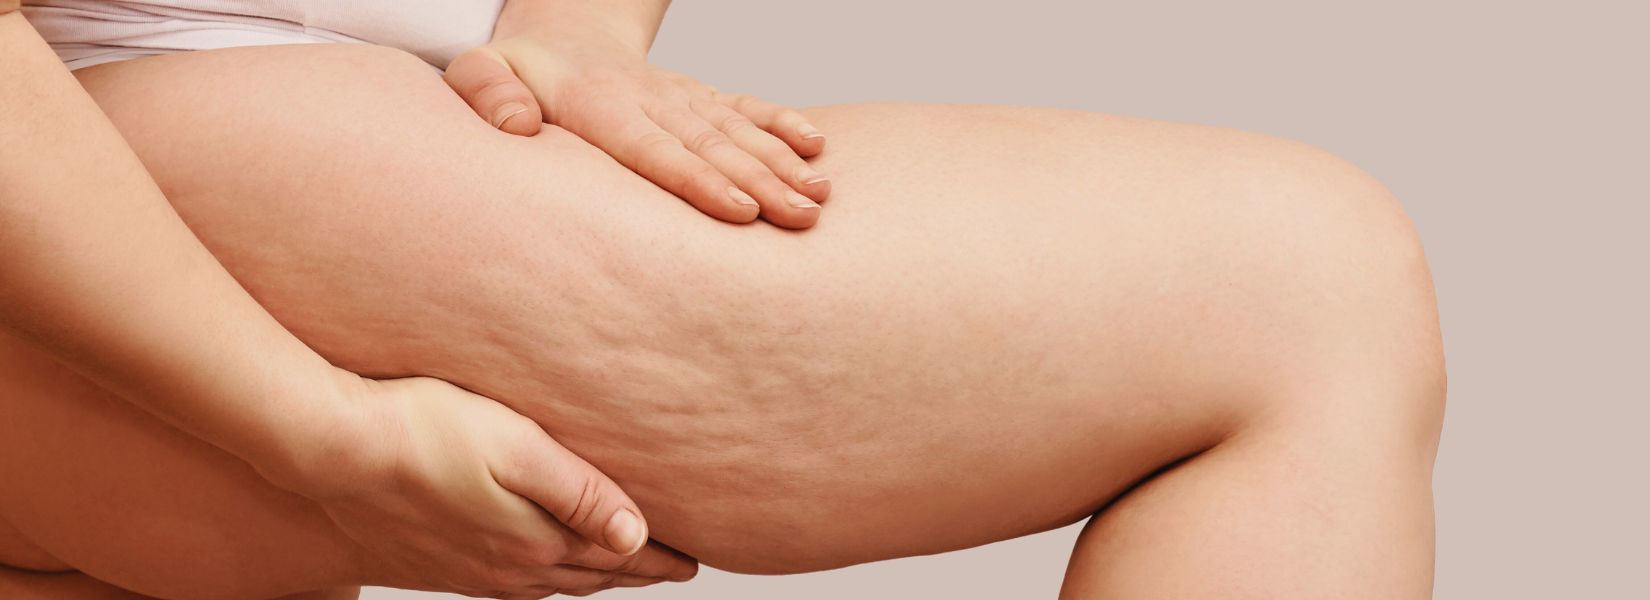 Unveiling The Cellulite Site: A Journey of Courage, Compassion, and Commitment